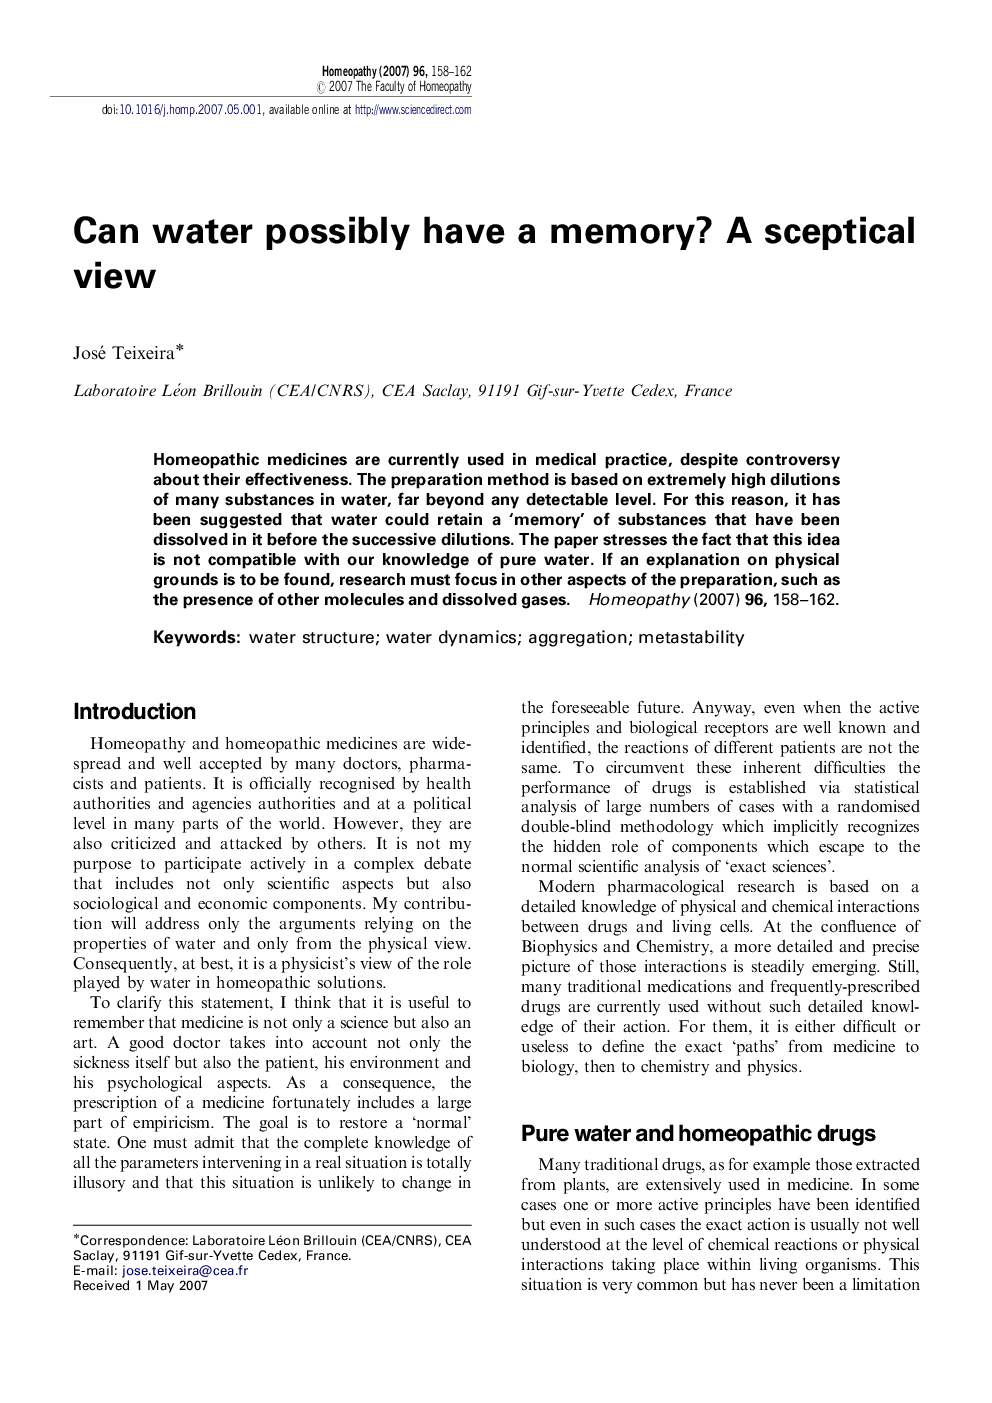 Can water possibly have a memory? A sceptical view